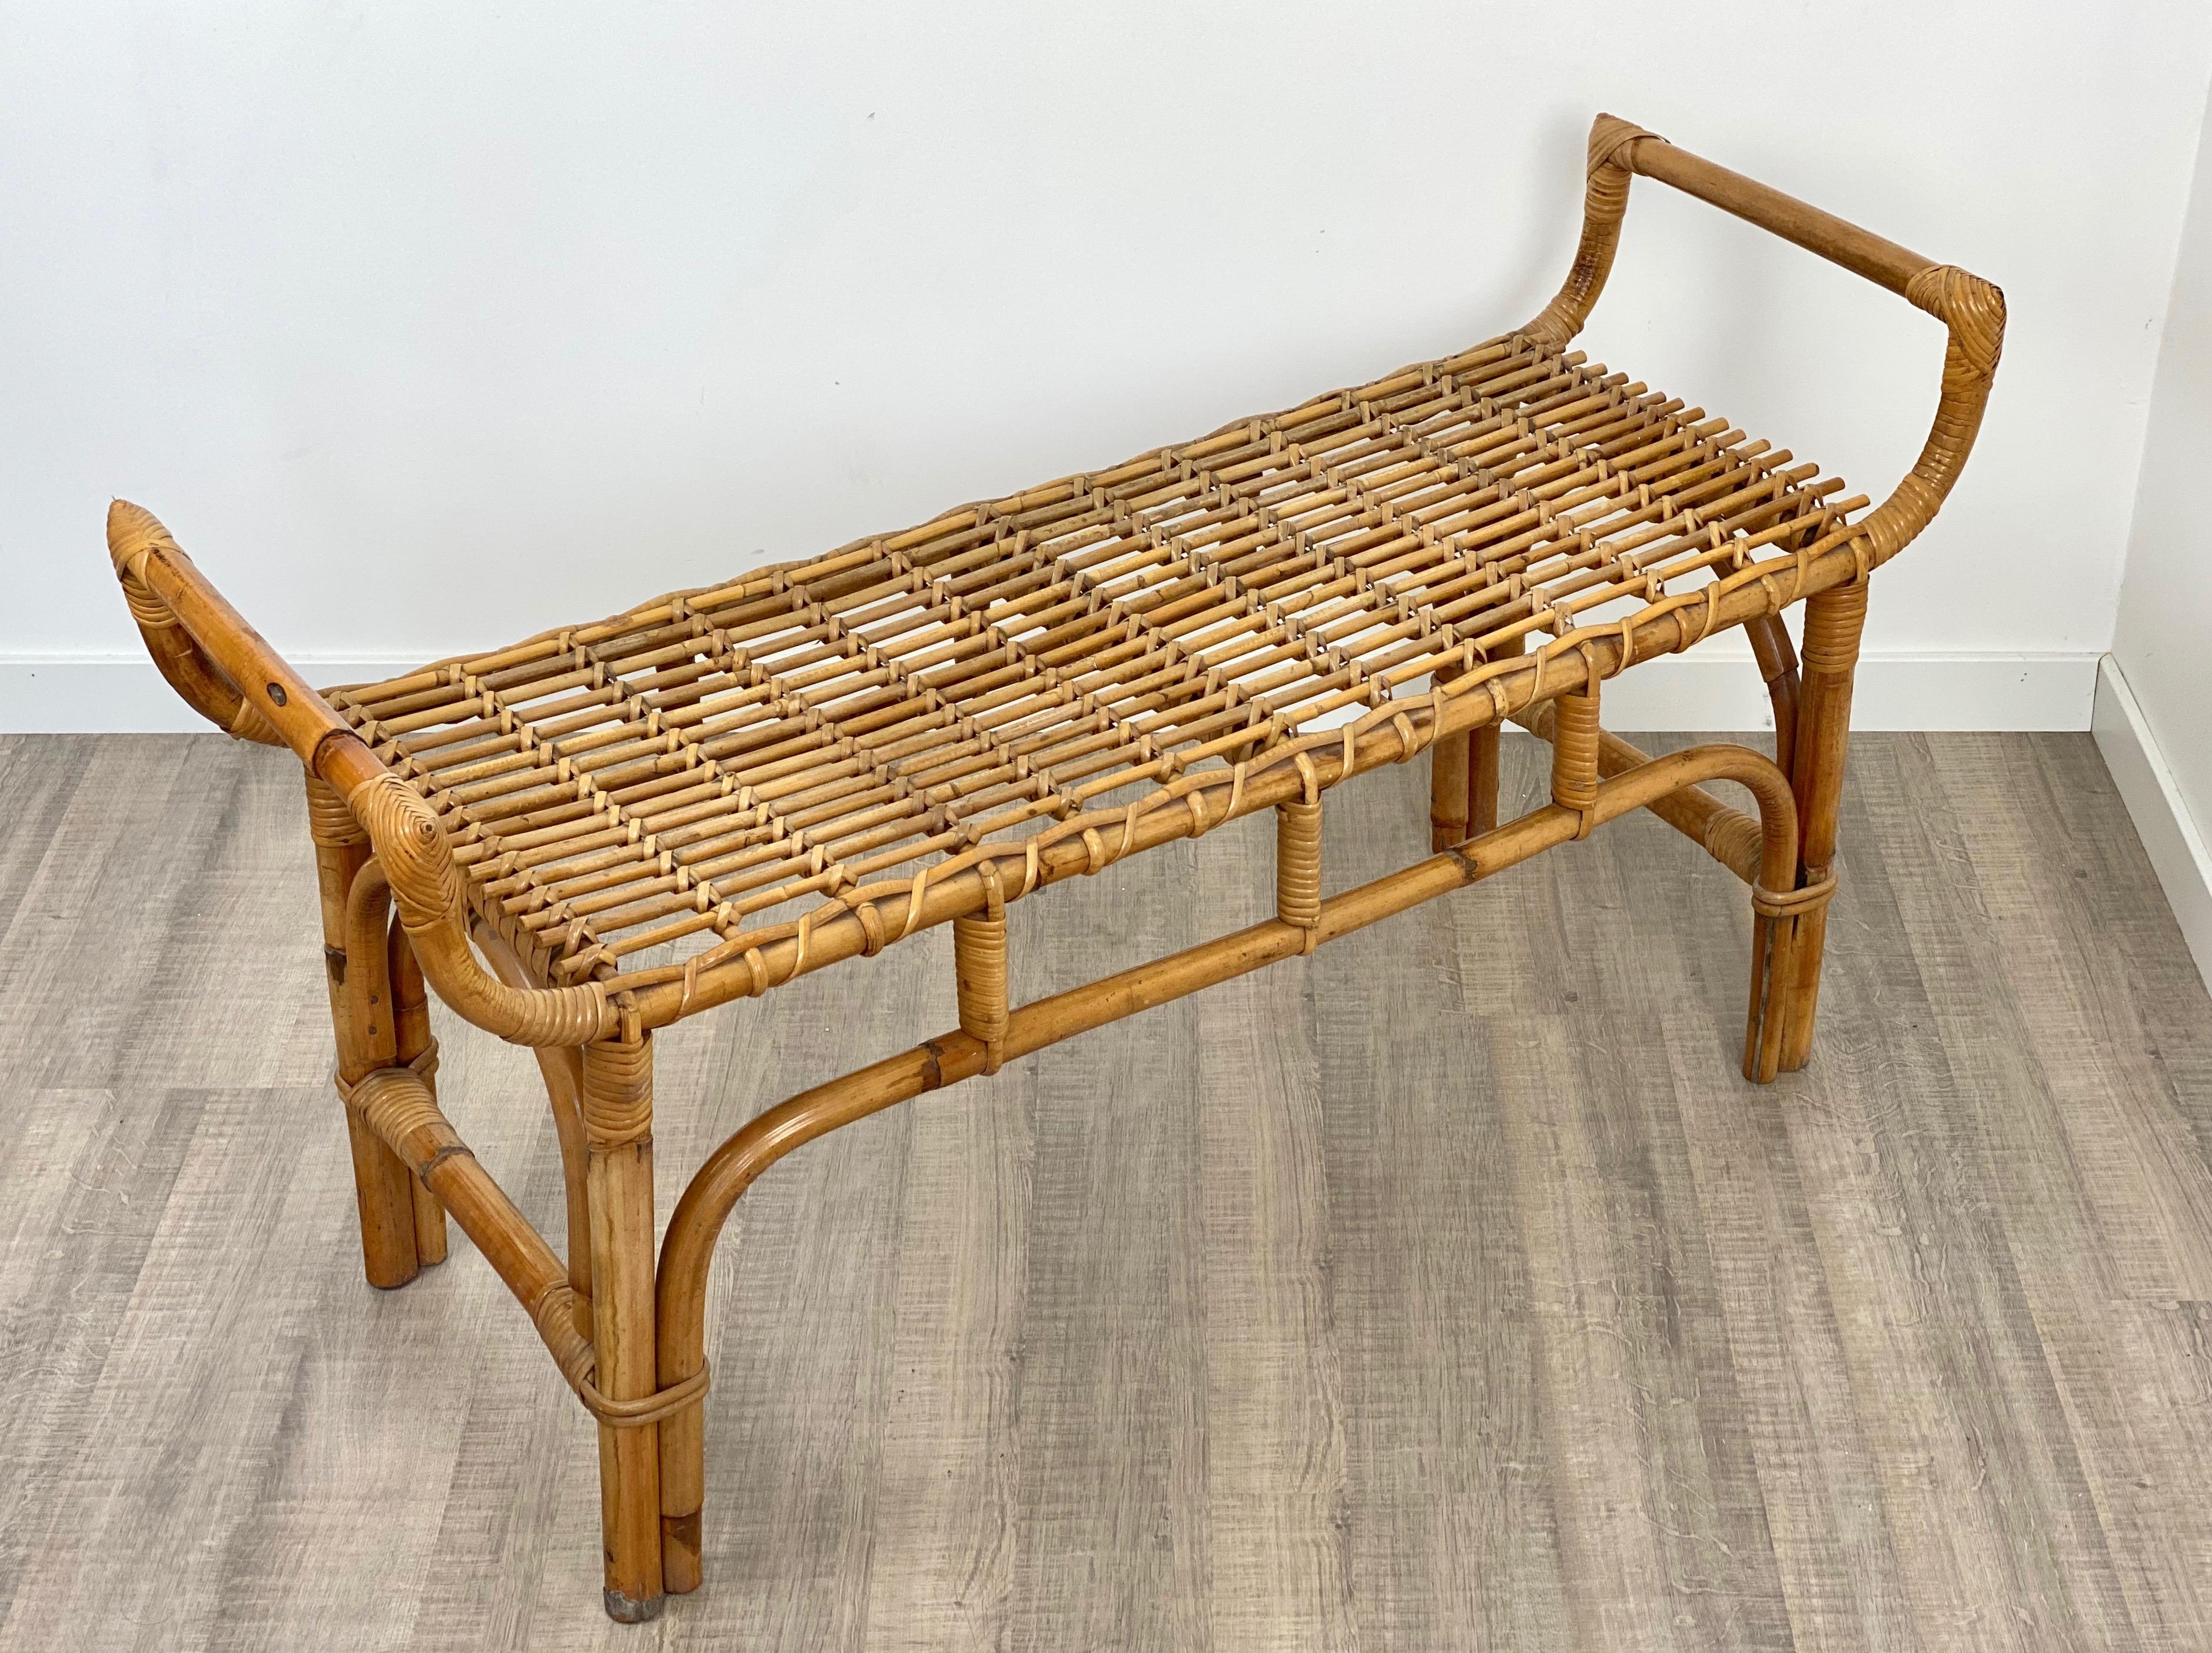 Bench made of rattan by the Italian designer Franco Albini for Bonacina. Typical Italian piece from the 1960s.